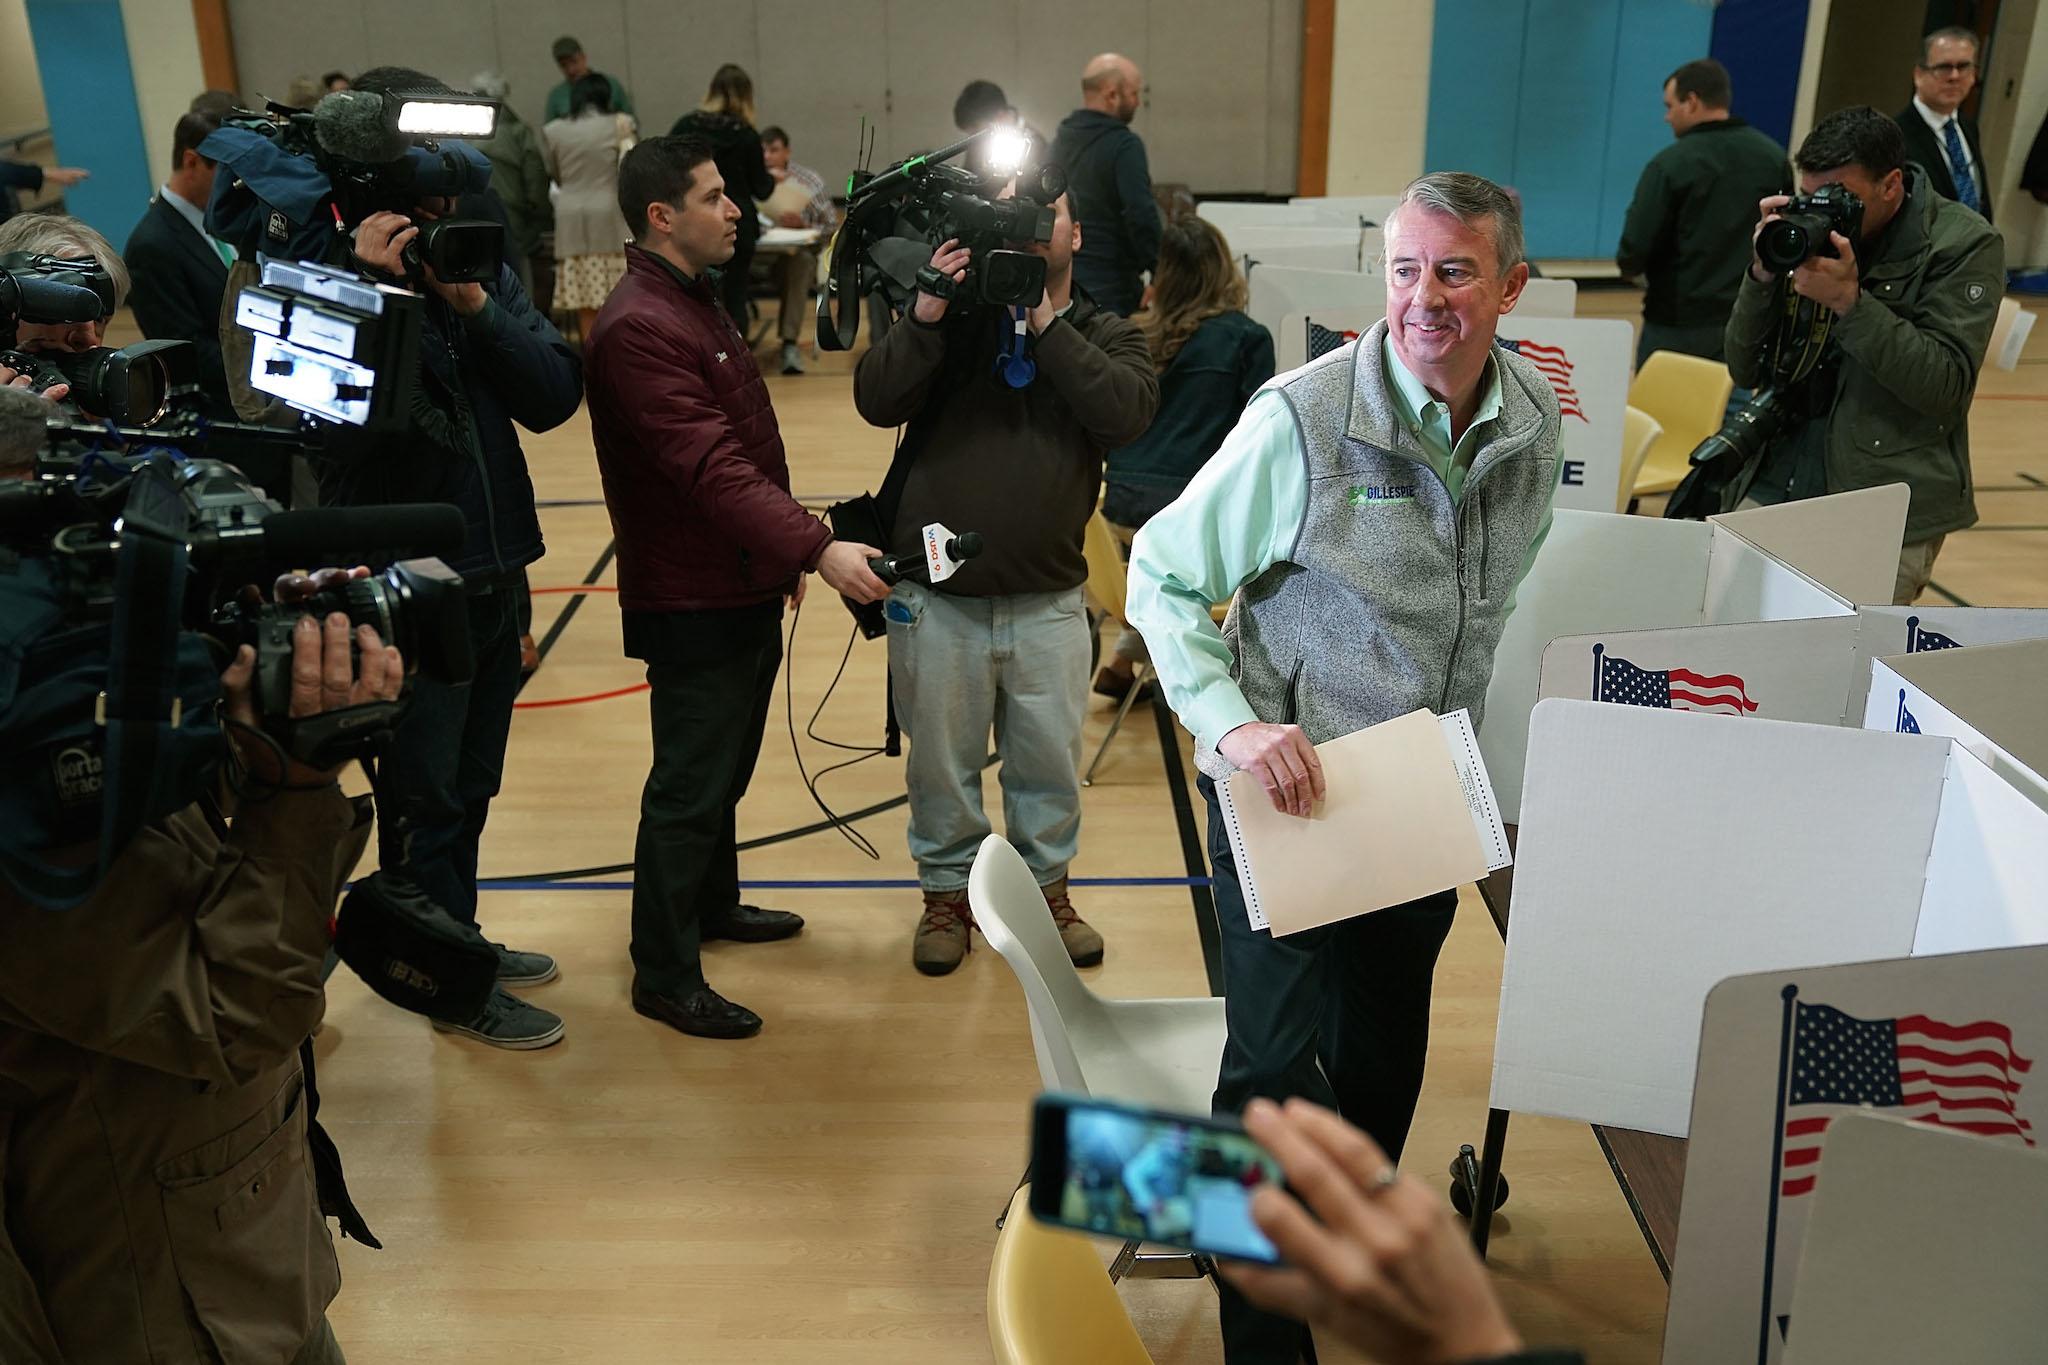 Surrounded by journalists, Republican candidate for Virginia governor Ed Gillespie casts his vote in the gymnasium at Washington Mill Elementary School in Alexandria, Virginia (Photo by Chip Somodevilla/Getty Images)